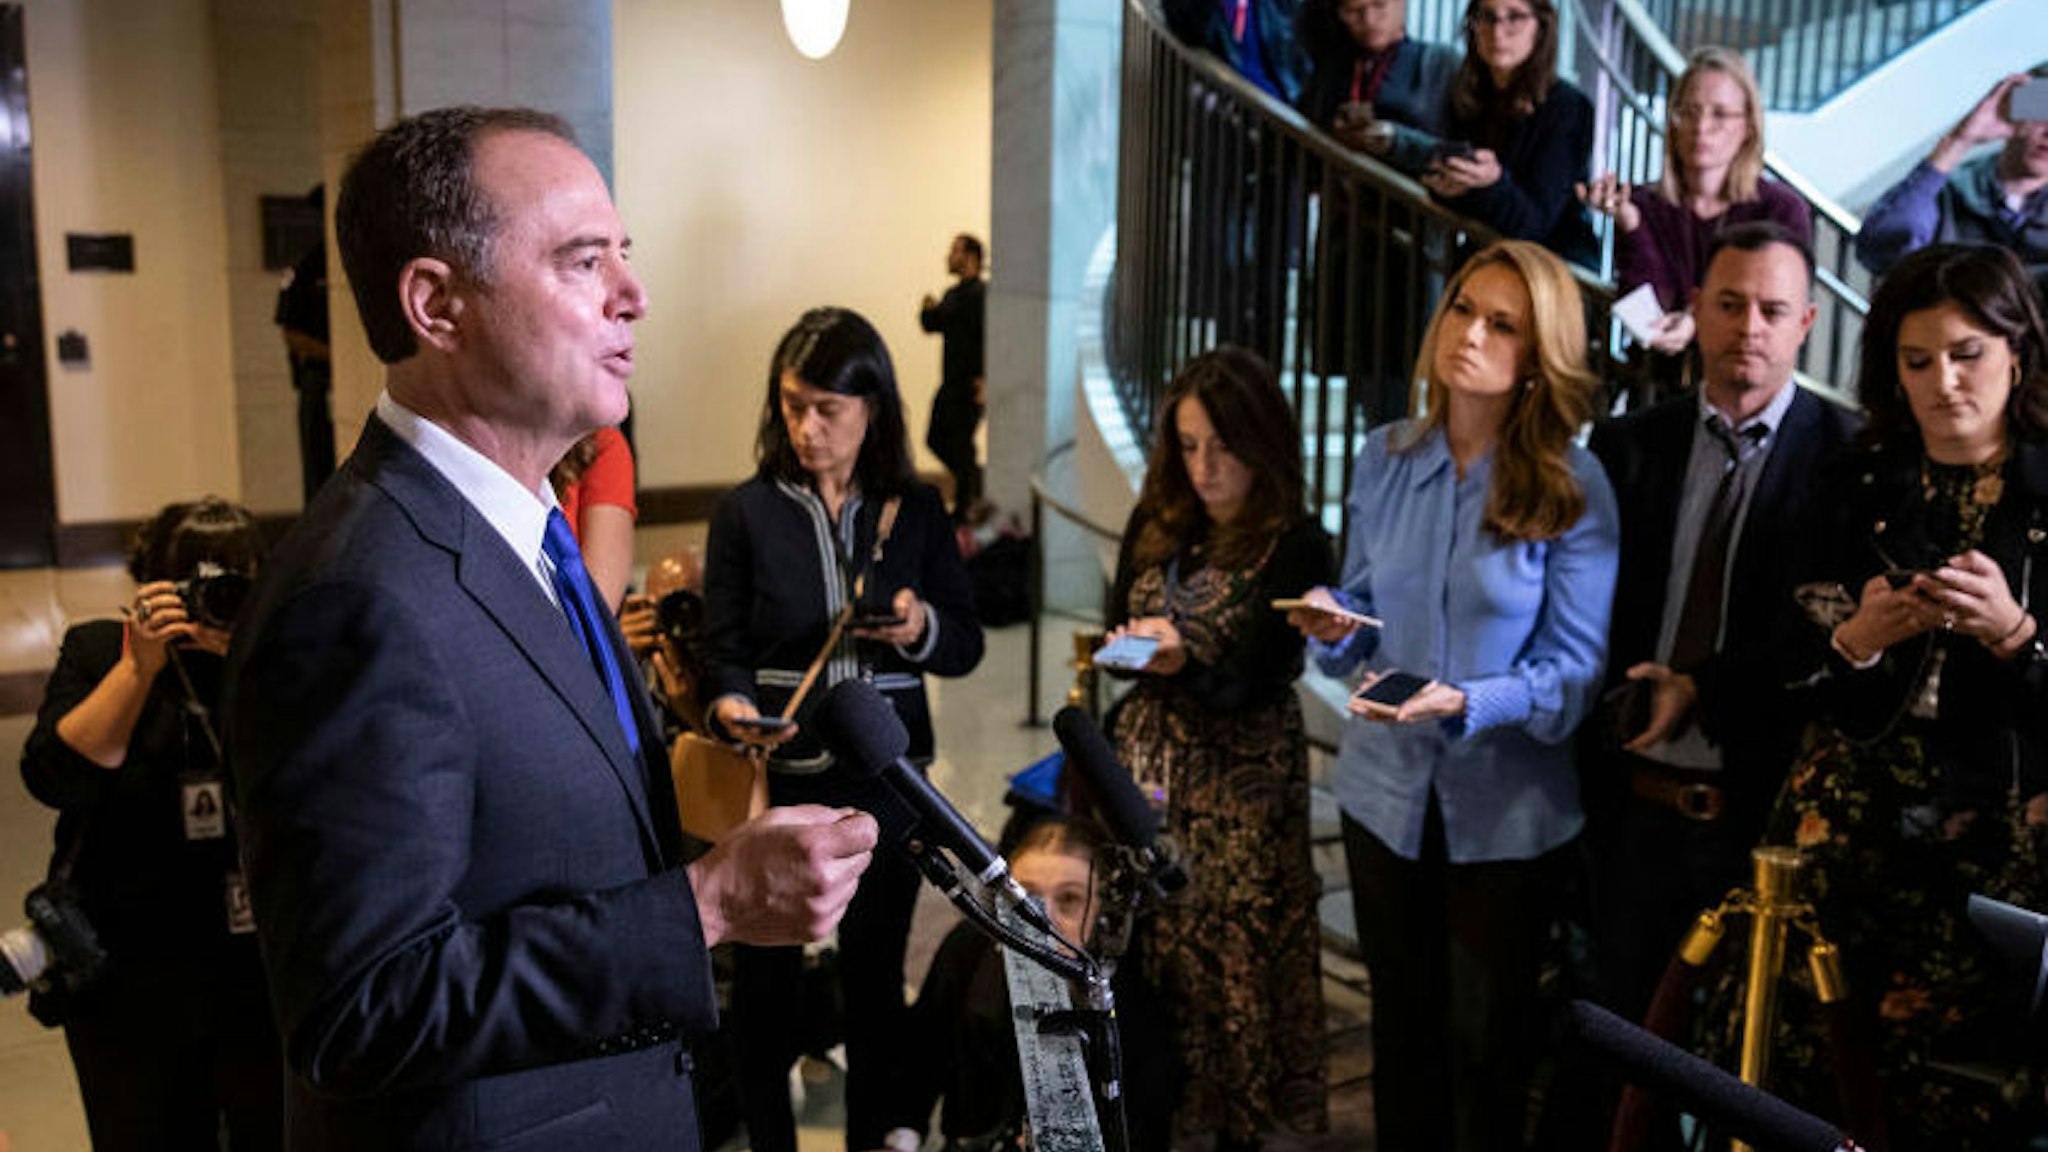 U.S. House Intelligence Committee Chairman Rep. Adam Schiff (D-CA) speaks to reporters following a closed-door hearing with the House Intelligence, Foreign Affairs and Oversight committees at the U.S. Capitol on November 4, 2019 in Washington, DC. On Monday, House investigators released the first transcripts from closed-door depositions in the impeachment inquiry. Four White House officials scheduled for depositions in the impeachment inquiry on Monday have signaled that they will not show up. (Photo by Drew Angerer/Getty Images)